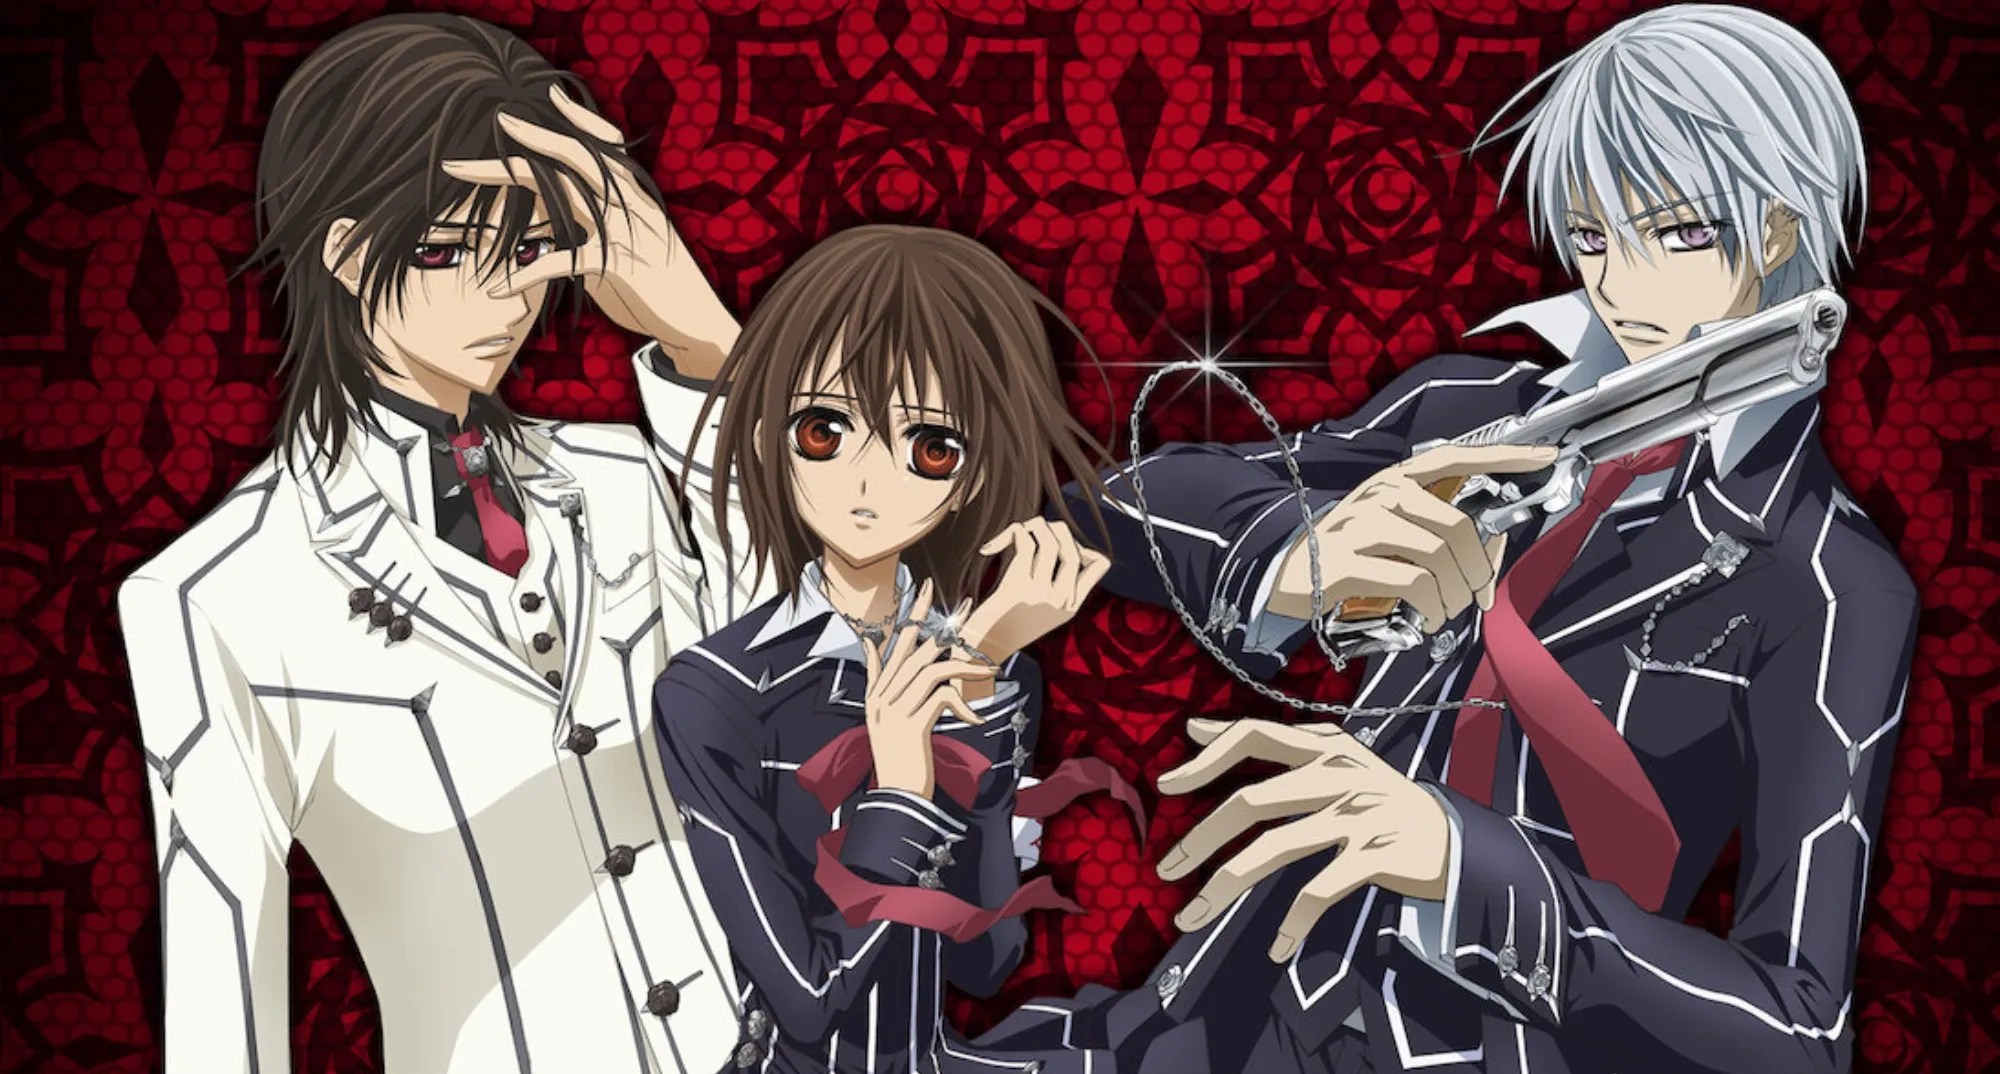 Vampire Knight's Return: What's the Buzz About a Season 3?